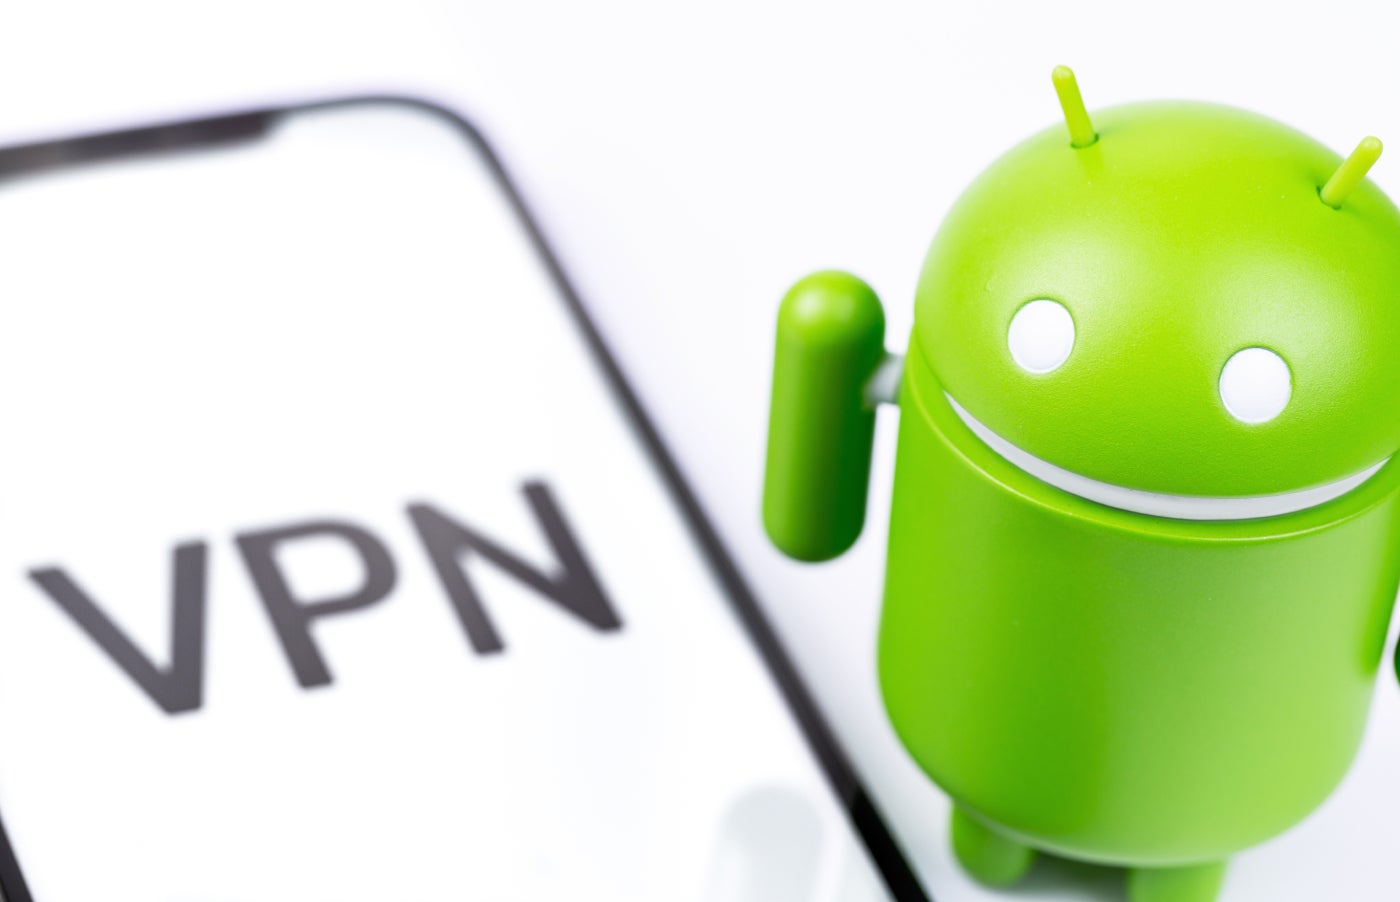 <div>How to Set Up & Use a VPN on Android (A Step-by-Step Guide)</div>